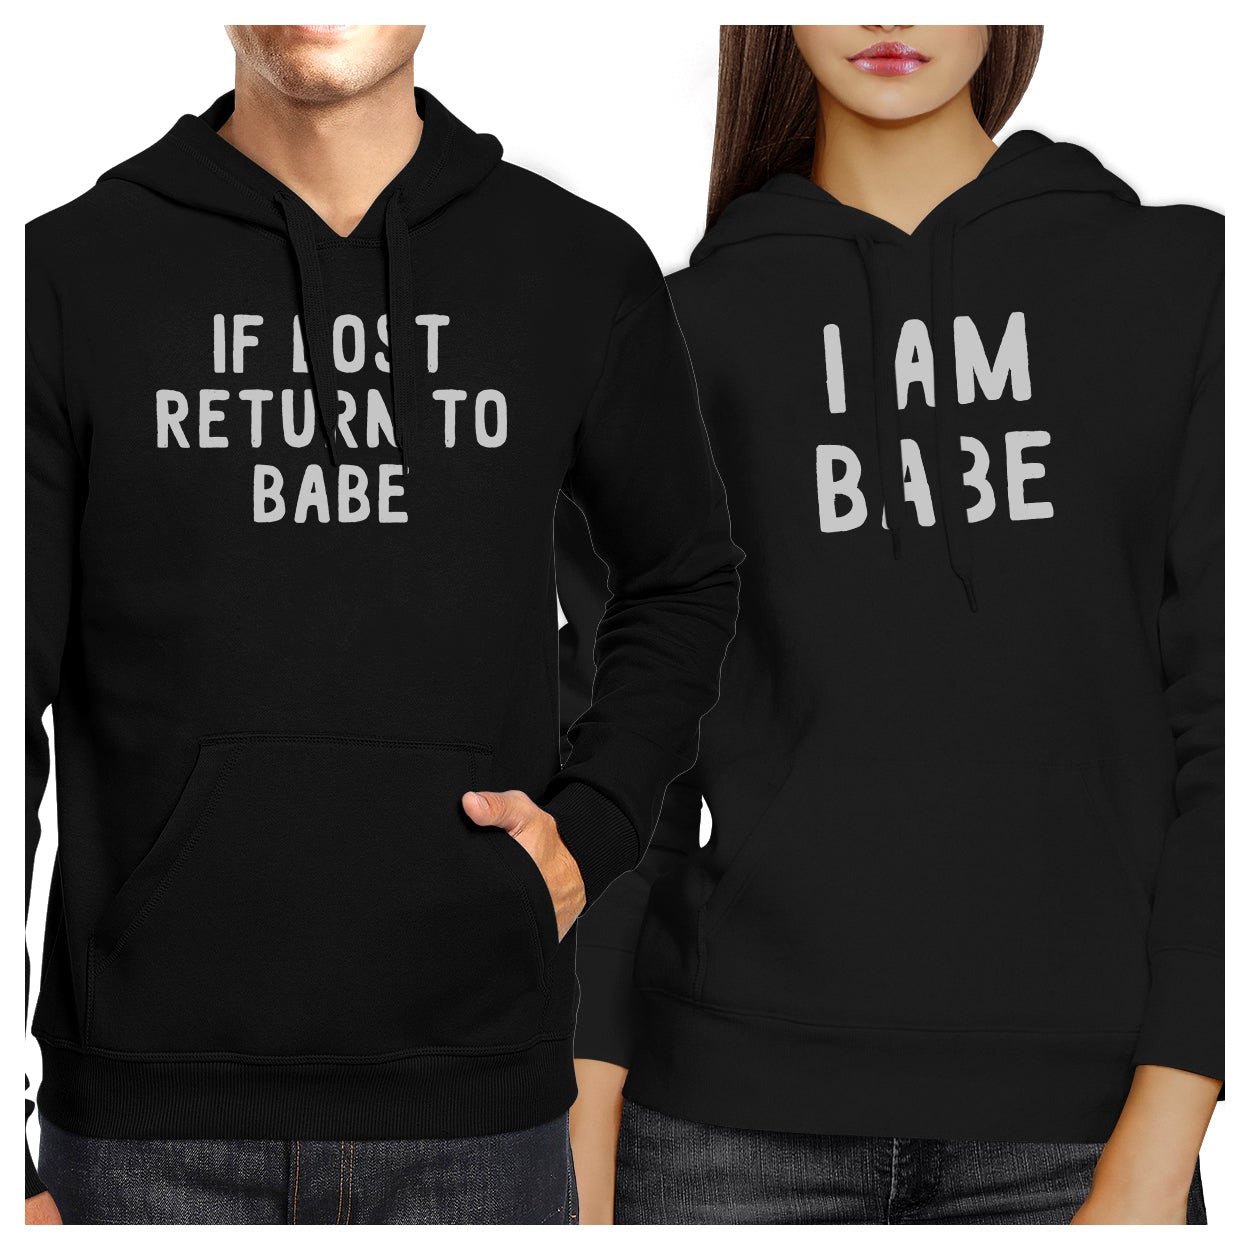 If Lost Return To Babe And I Am Babe Matching Couple Black Hoodie